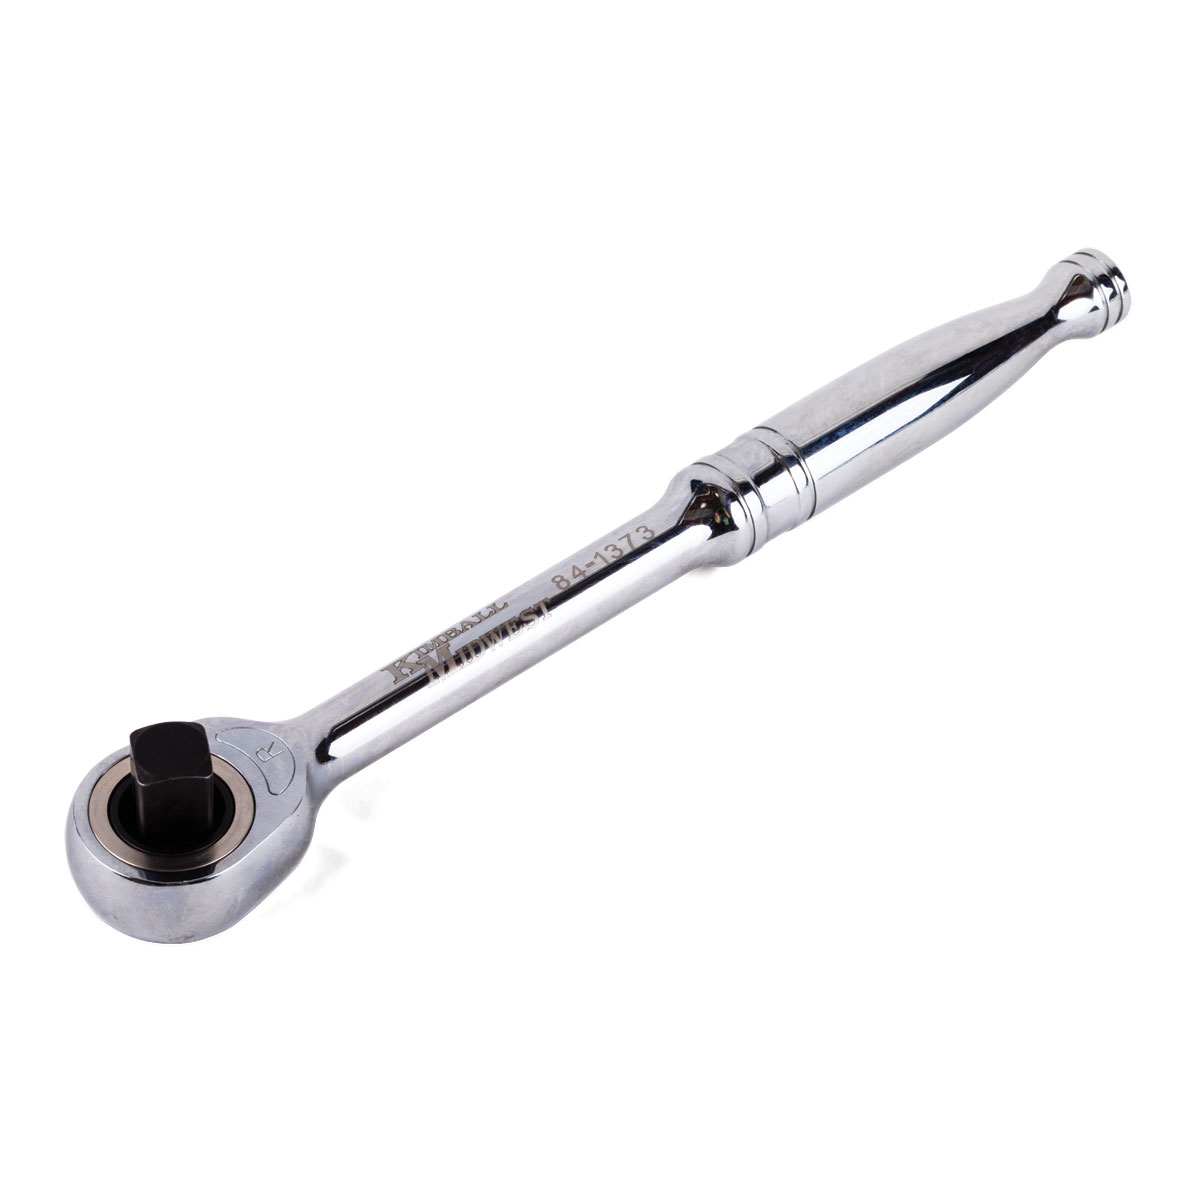 1/2" Gearless Ratchet Wrench